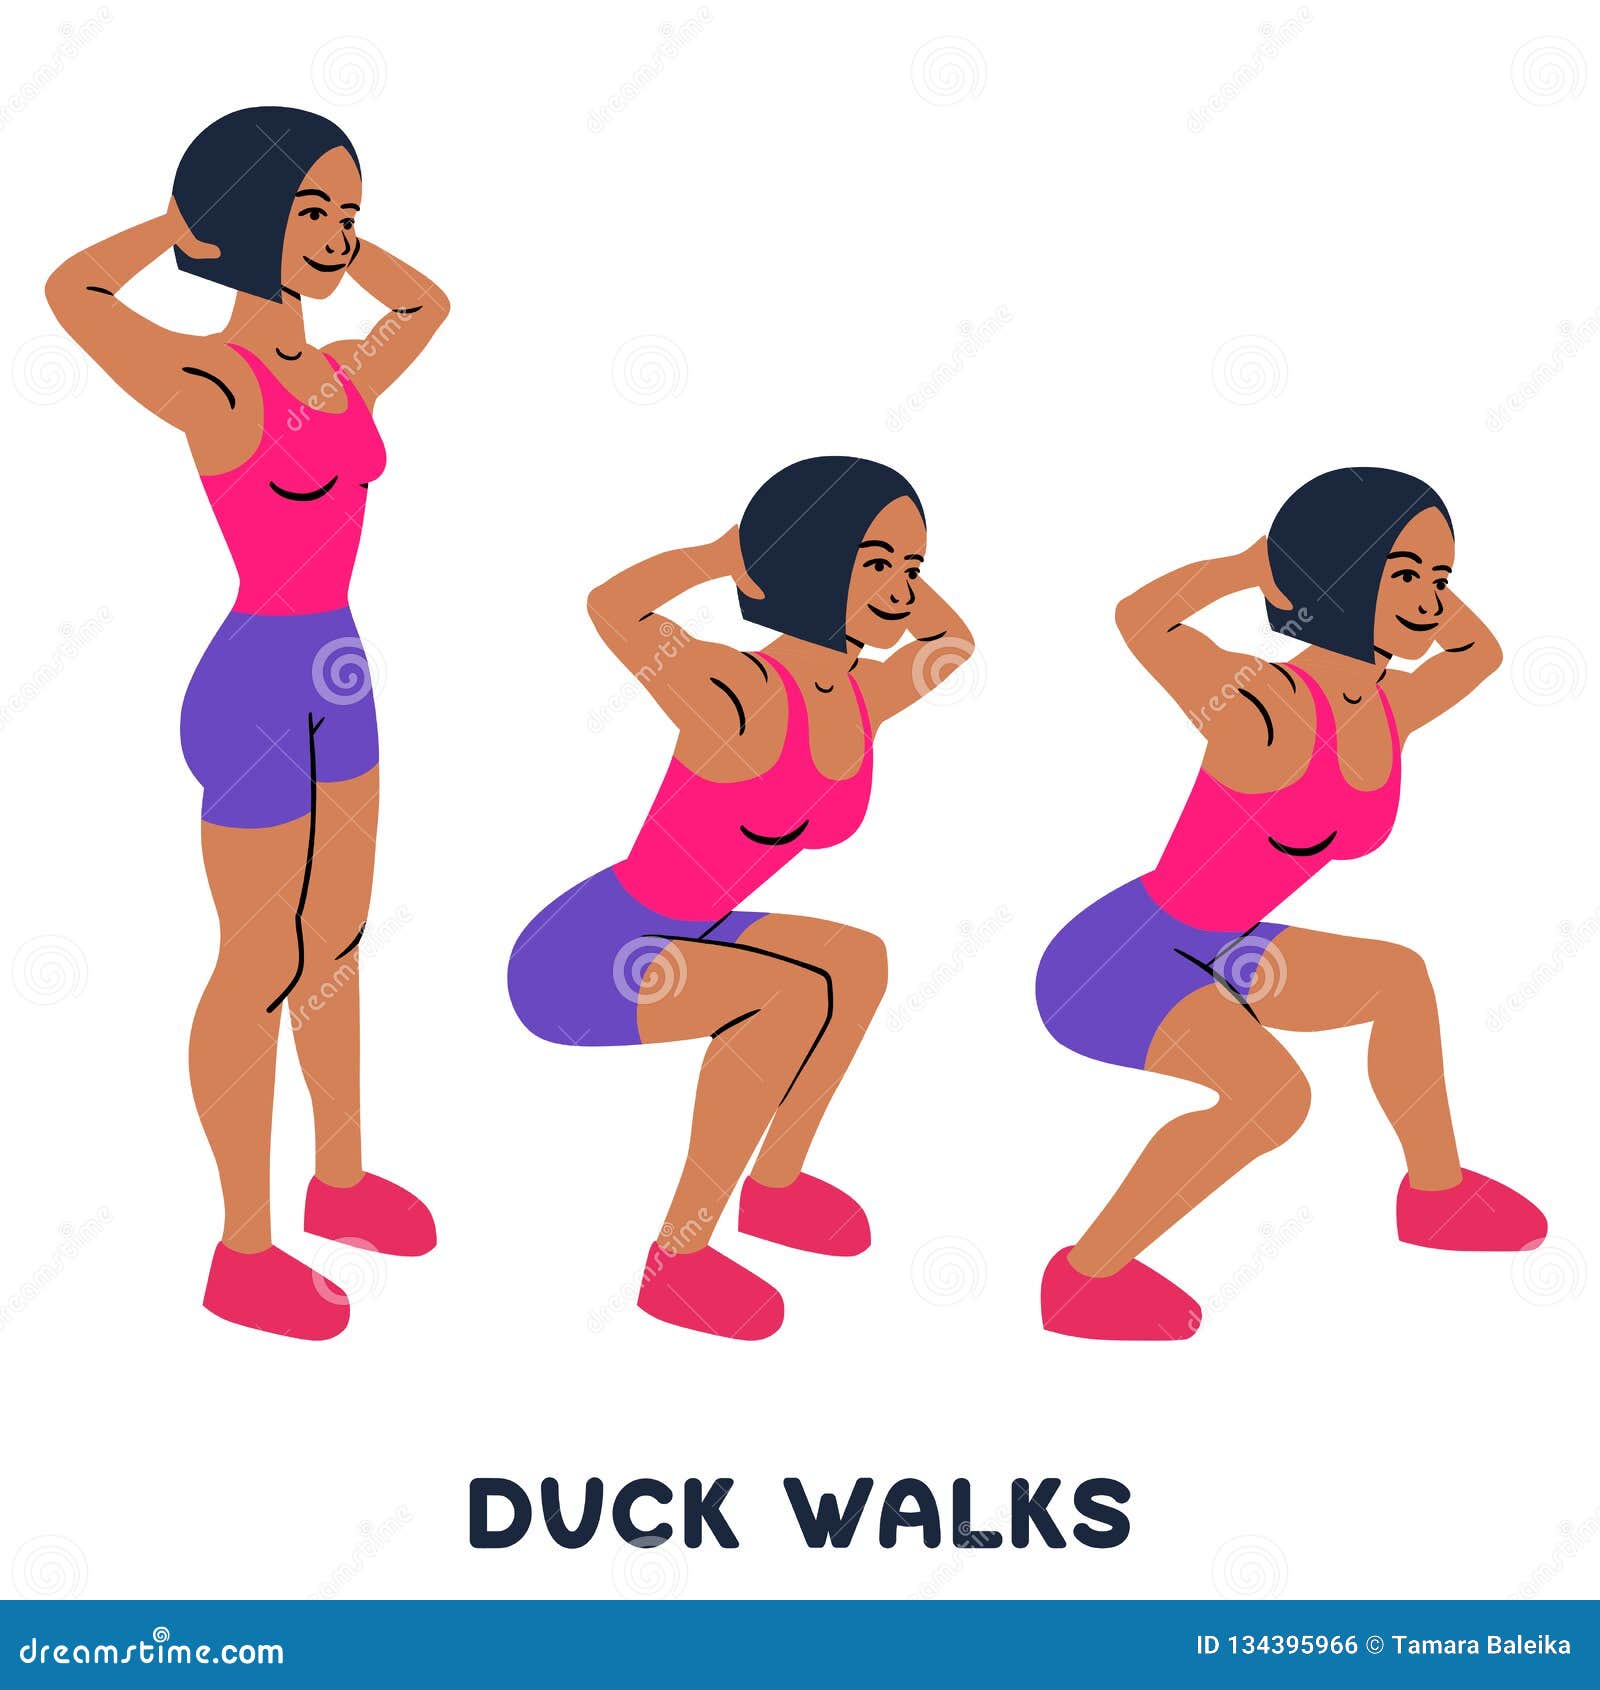 duck walks. squat. sport exersice. silhouettes of woman doing exercise. workout, training